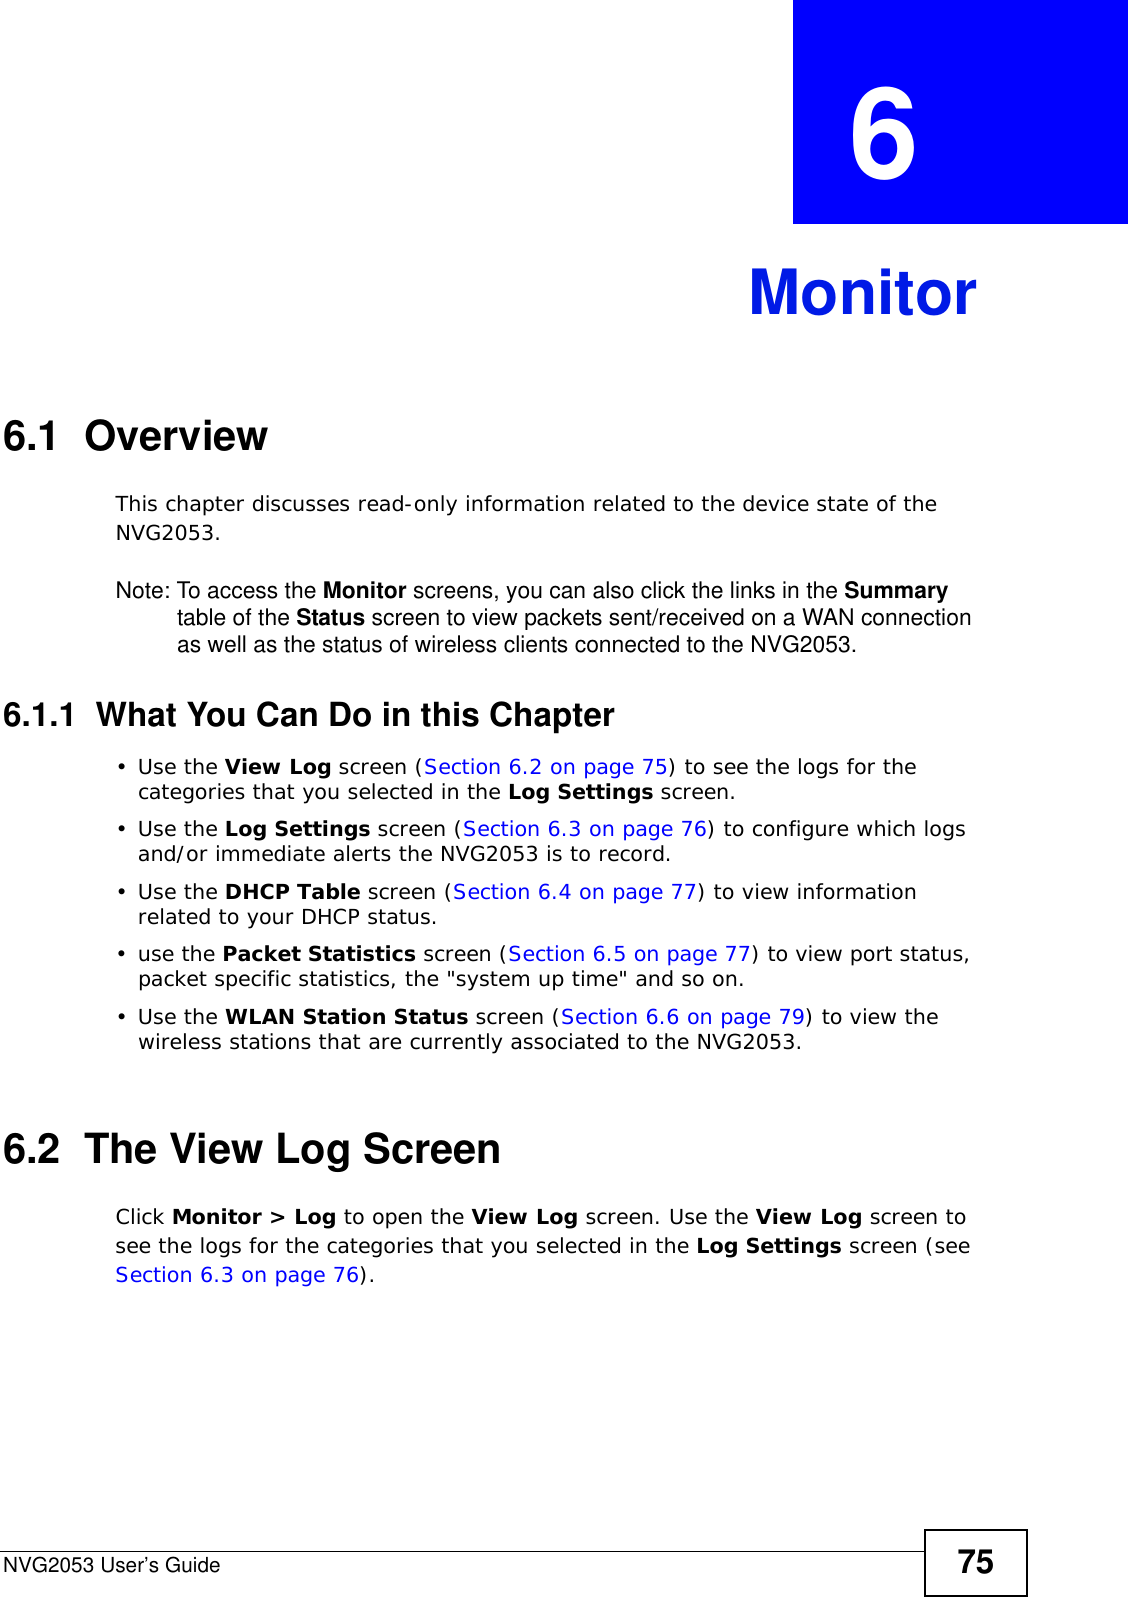 NVG2053 User’s Guide 75CHAPTER  6 Monitor6.1  OverviewThis chapter discusses read-only information related to the device state of the NVG2053. Note: To access the Monitor screens, you can also click the links in the Summary table of the Status screen to view packets sent/received on a WAN connection as well as the status of wireless clients connected to the NVG2053.6.1.1  What You Can Do in this Chapter•Use the View Log screen (Section 6.2 on page 75) to see the logs for the categories that you selected in the Log Settings screen.•Use the Log Settings screen (Section 6.3 on page 76) to configure which logs and/or immediate alerts the NVG2053 is to record.•Use the DHCP Table screen (Section 6.4 on page 77) to view information related to your DHCP status.•use the Packet Statistics screen (Section 6.5 on page 77) to view port status, packet specific statistics, the &quot;system up time&quot; and so on.•Use the WLAN Station Status screen (Section 6.6 on page 79) to view the wireless stations that are currently associated to the NVG2053.6.2  The View Log ScreenClick Monitor &gt; Log to open the View Log screen. Use the View Log screen to see the logs for the categories that you selected in the Log Settings screen (see Section 6.3 on page 76).  